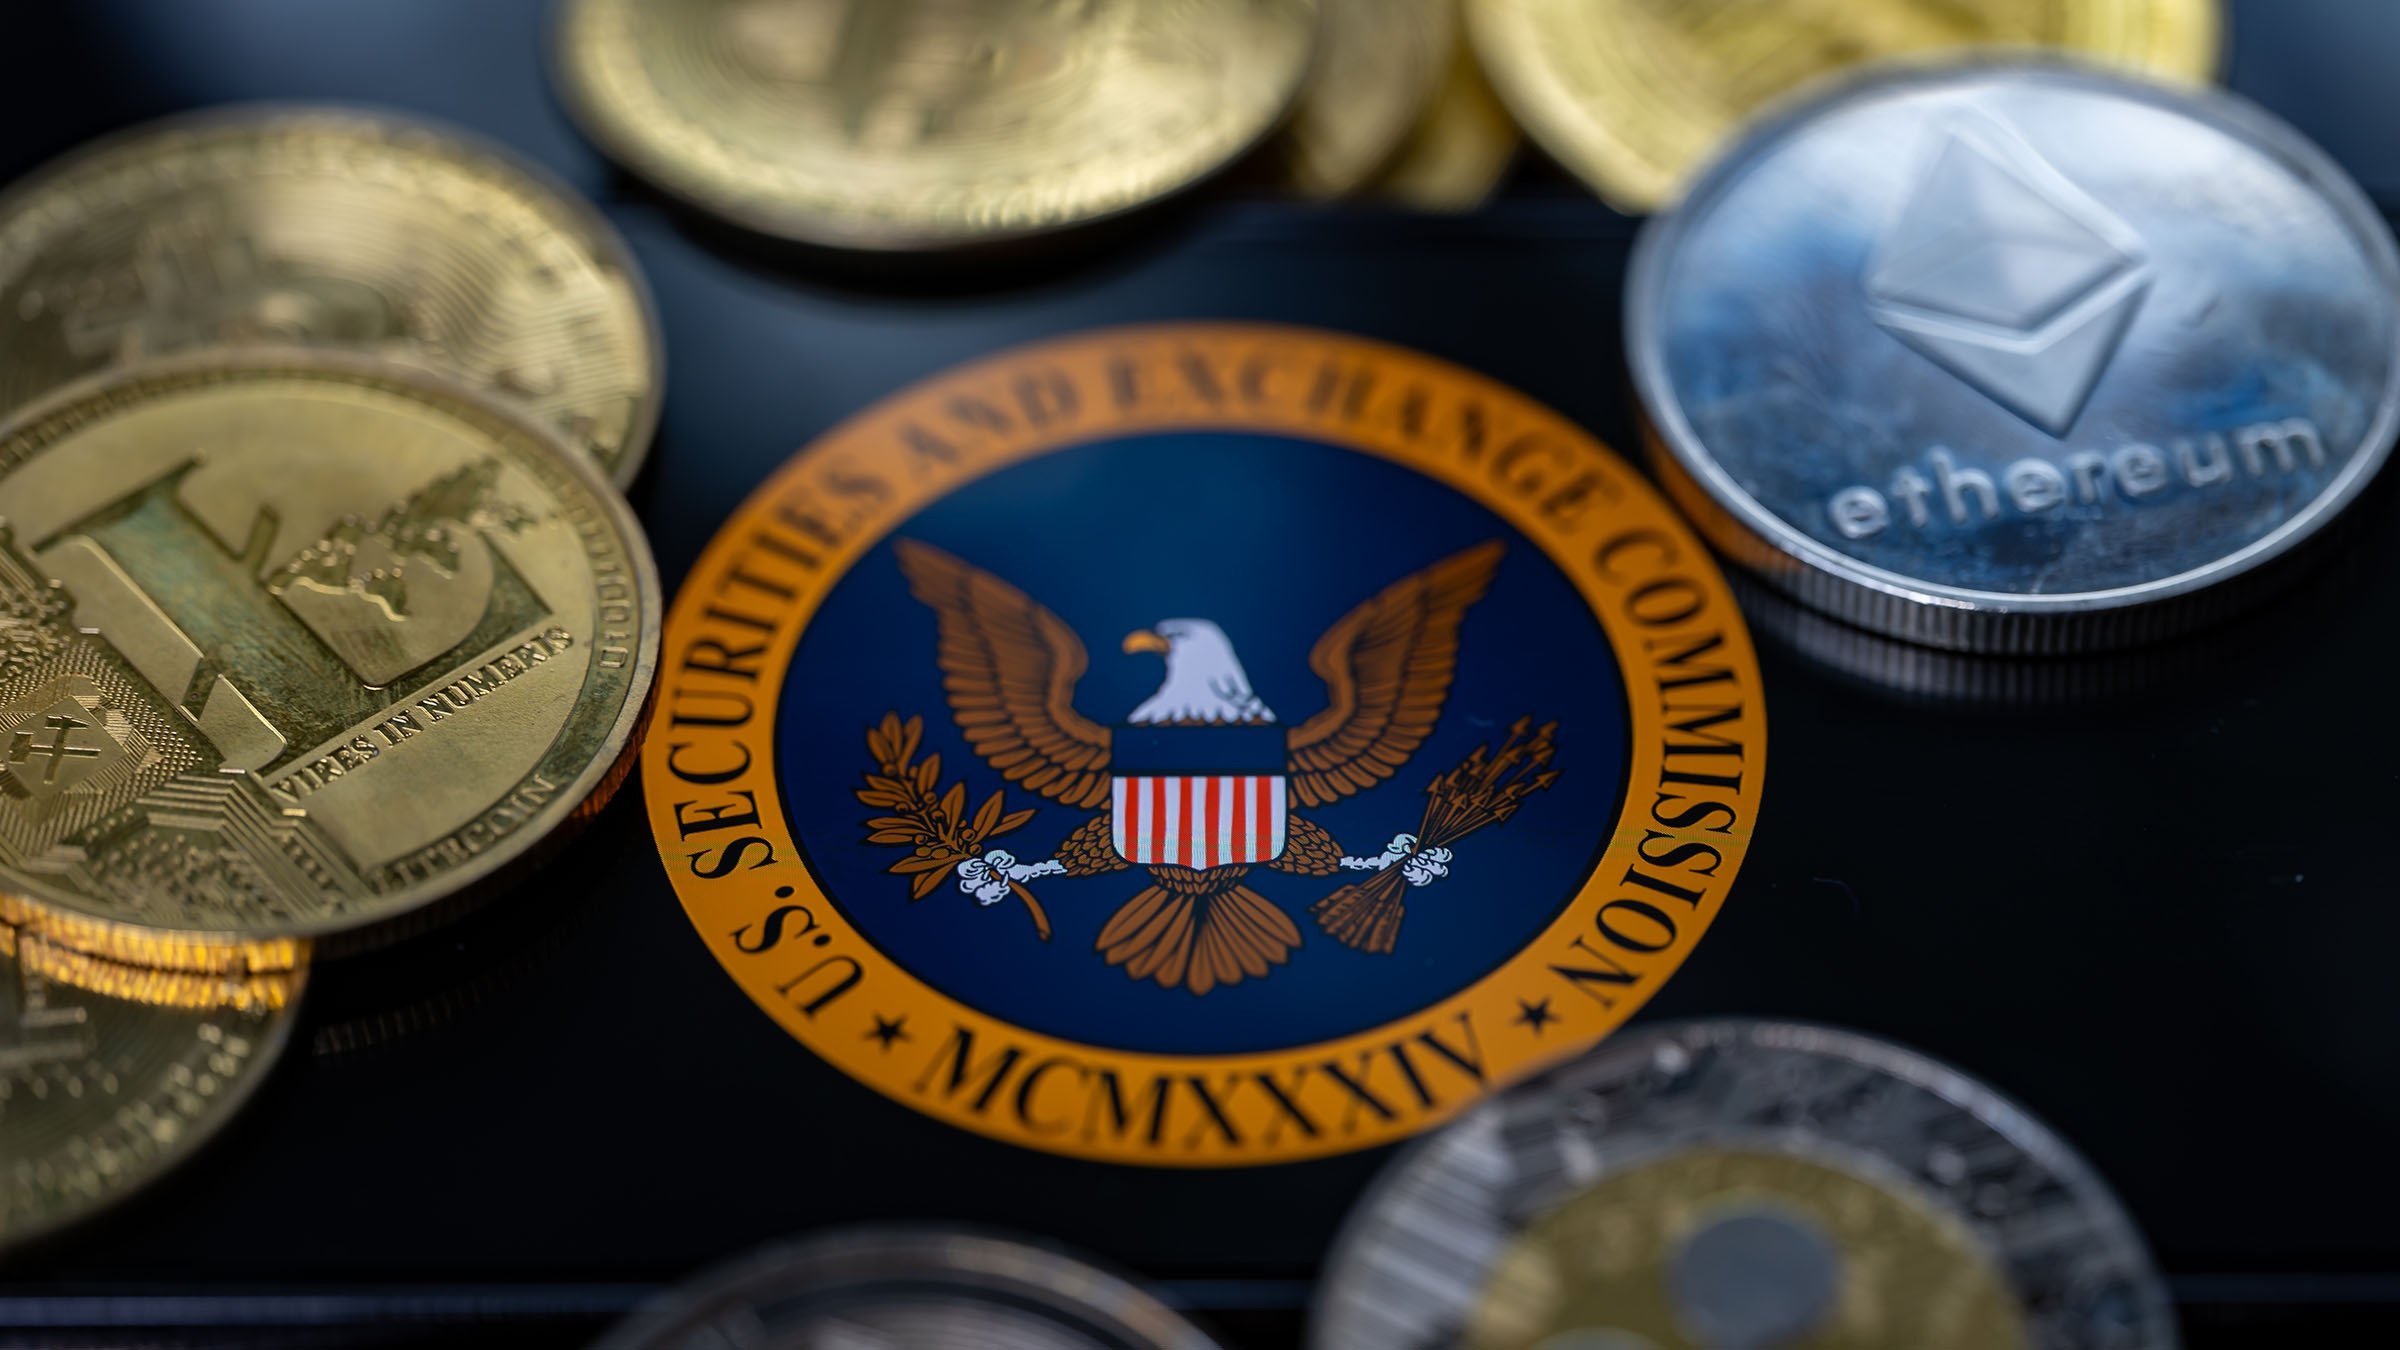 SEC Wants More Than Just a 'Slap On the Wrist' Against Ripple